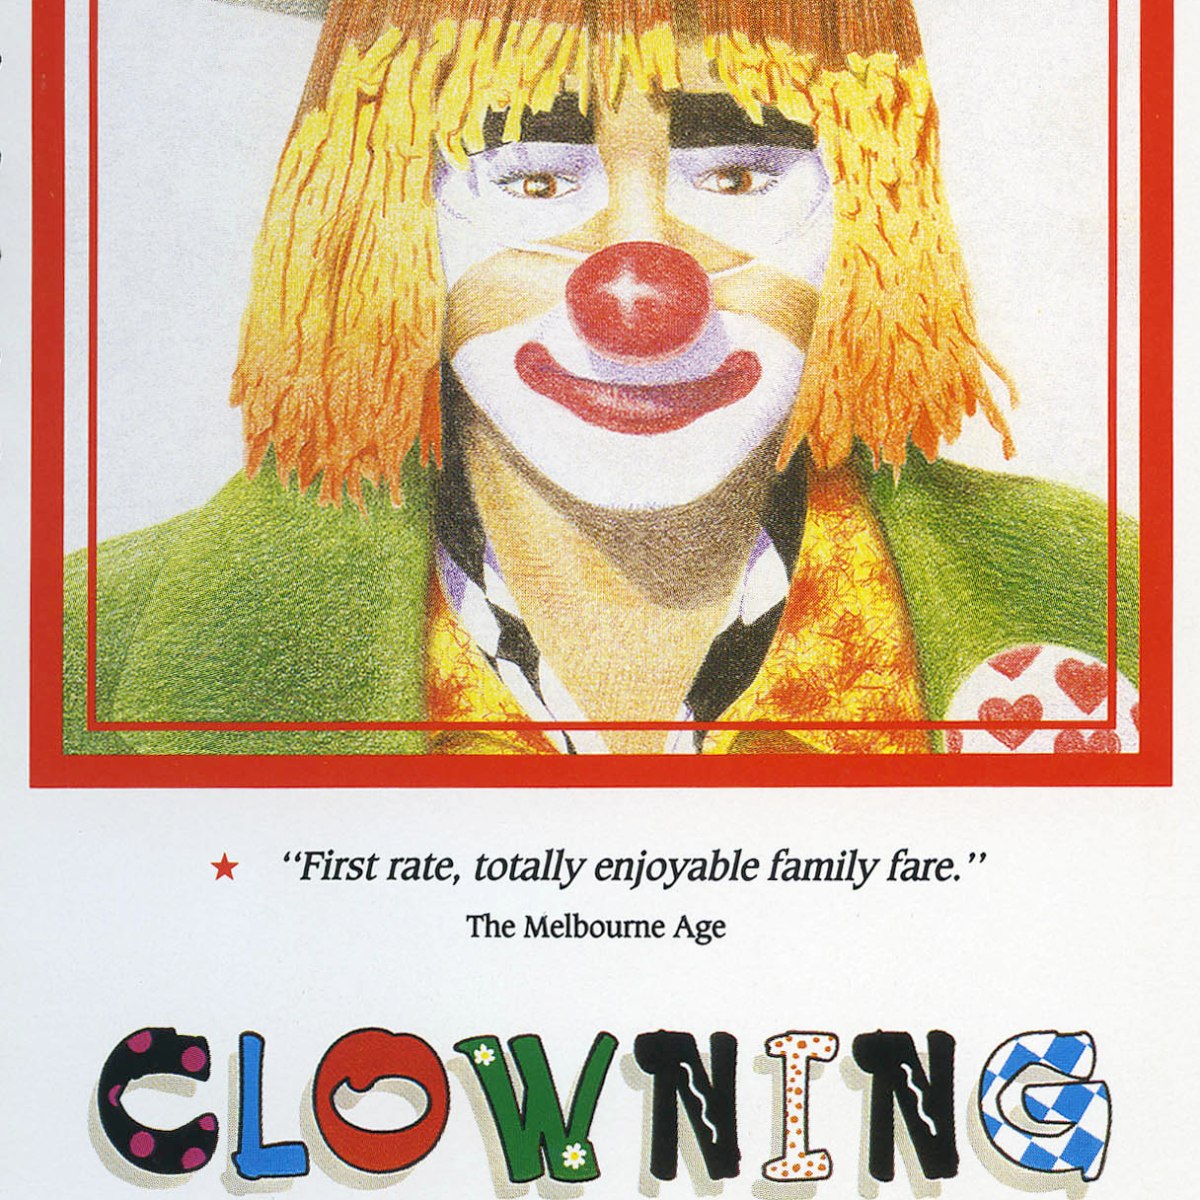 Clowning Around (1991): Brief Review